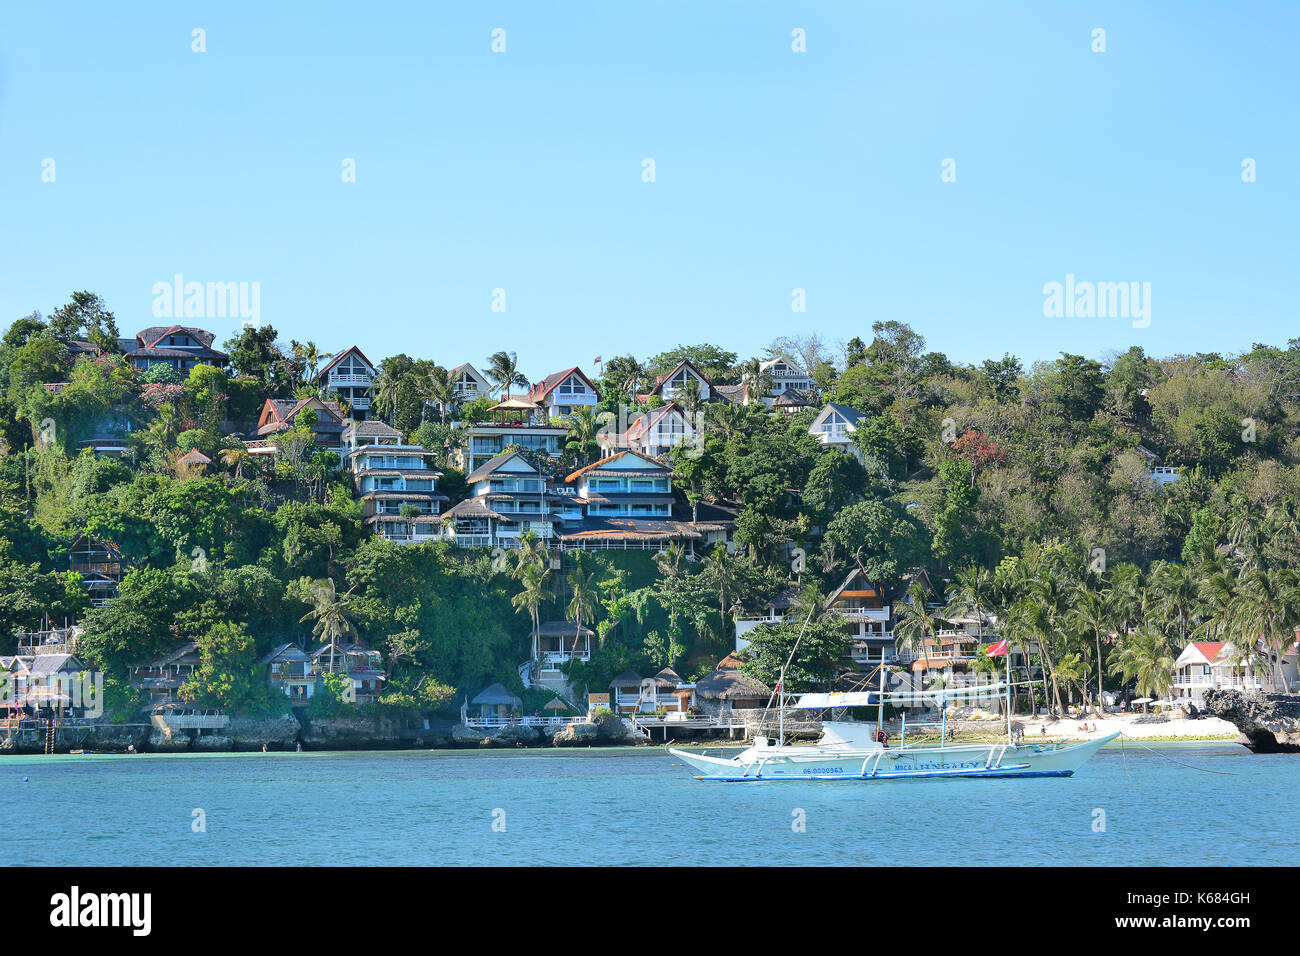 BORACAY, PHILIPPINES - APRIL 7, 2016: Shangri La Boracay Resort and Spa from the water. The luxury resort is adjacent ot an eco-reserve. Stock Photo